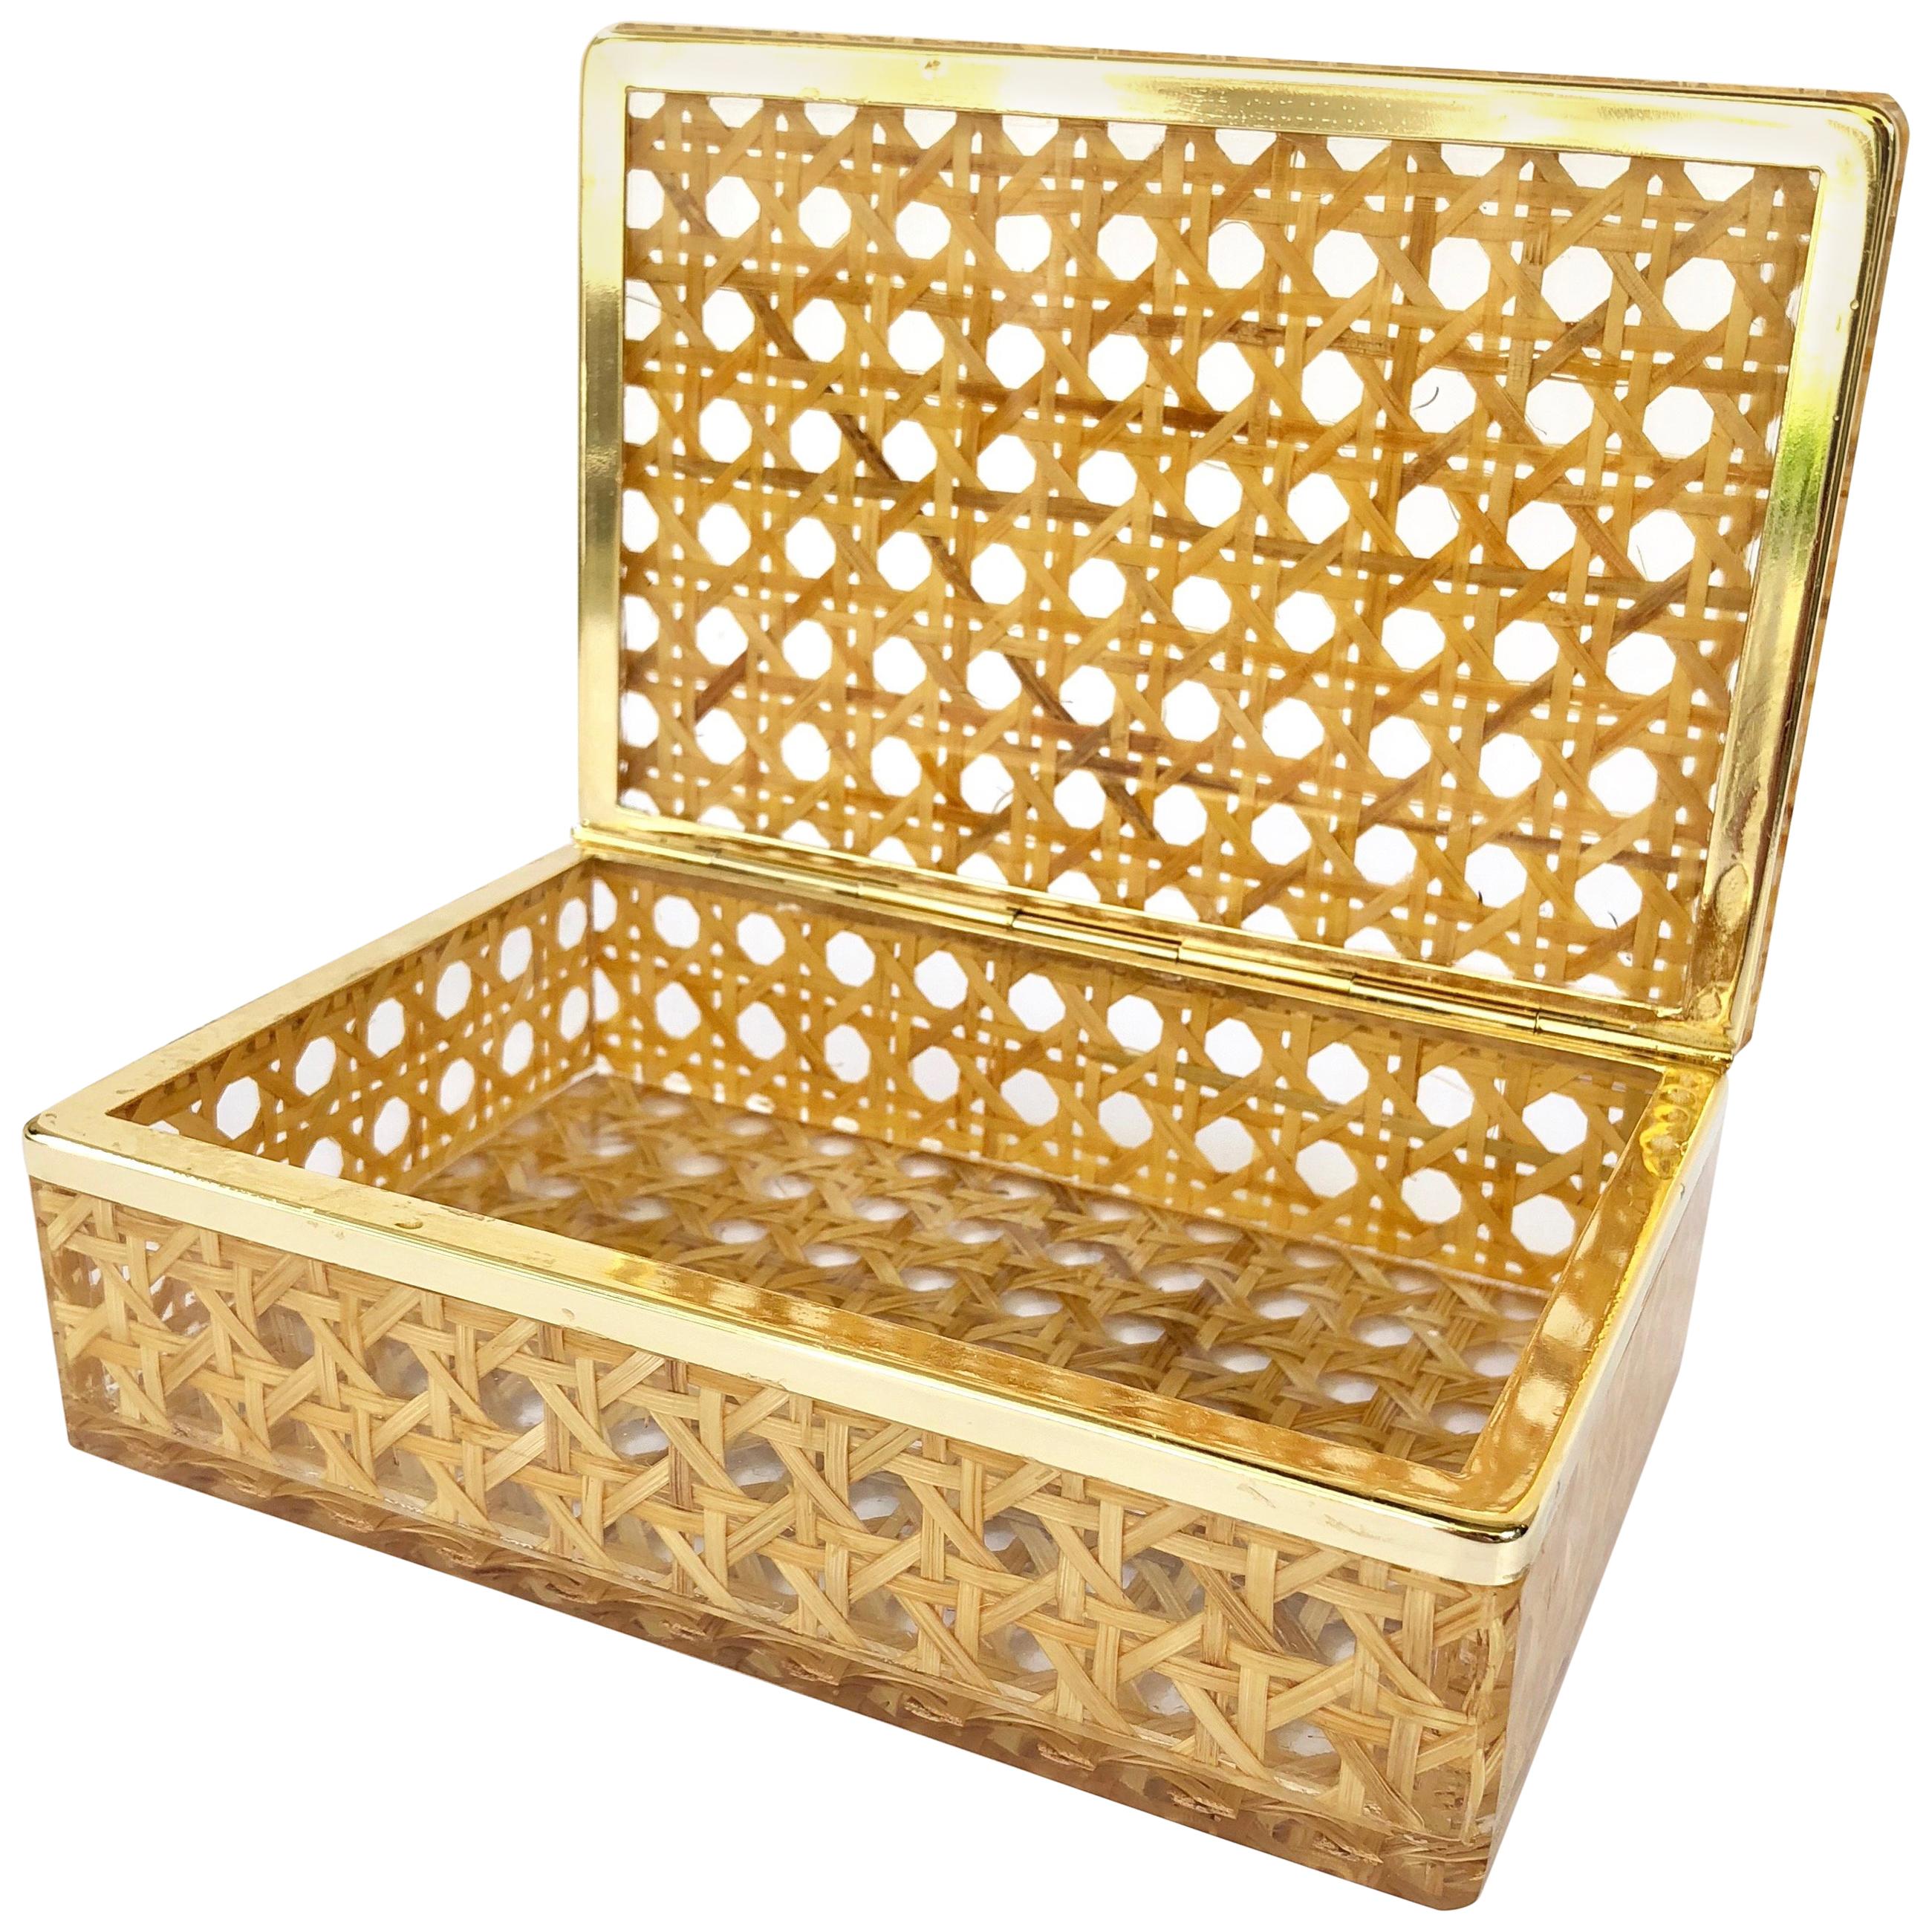 Box in Lucite, Wicker and Brass in Christian Dior Style, 1970